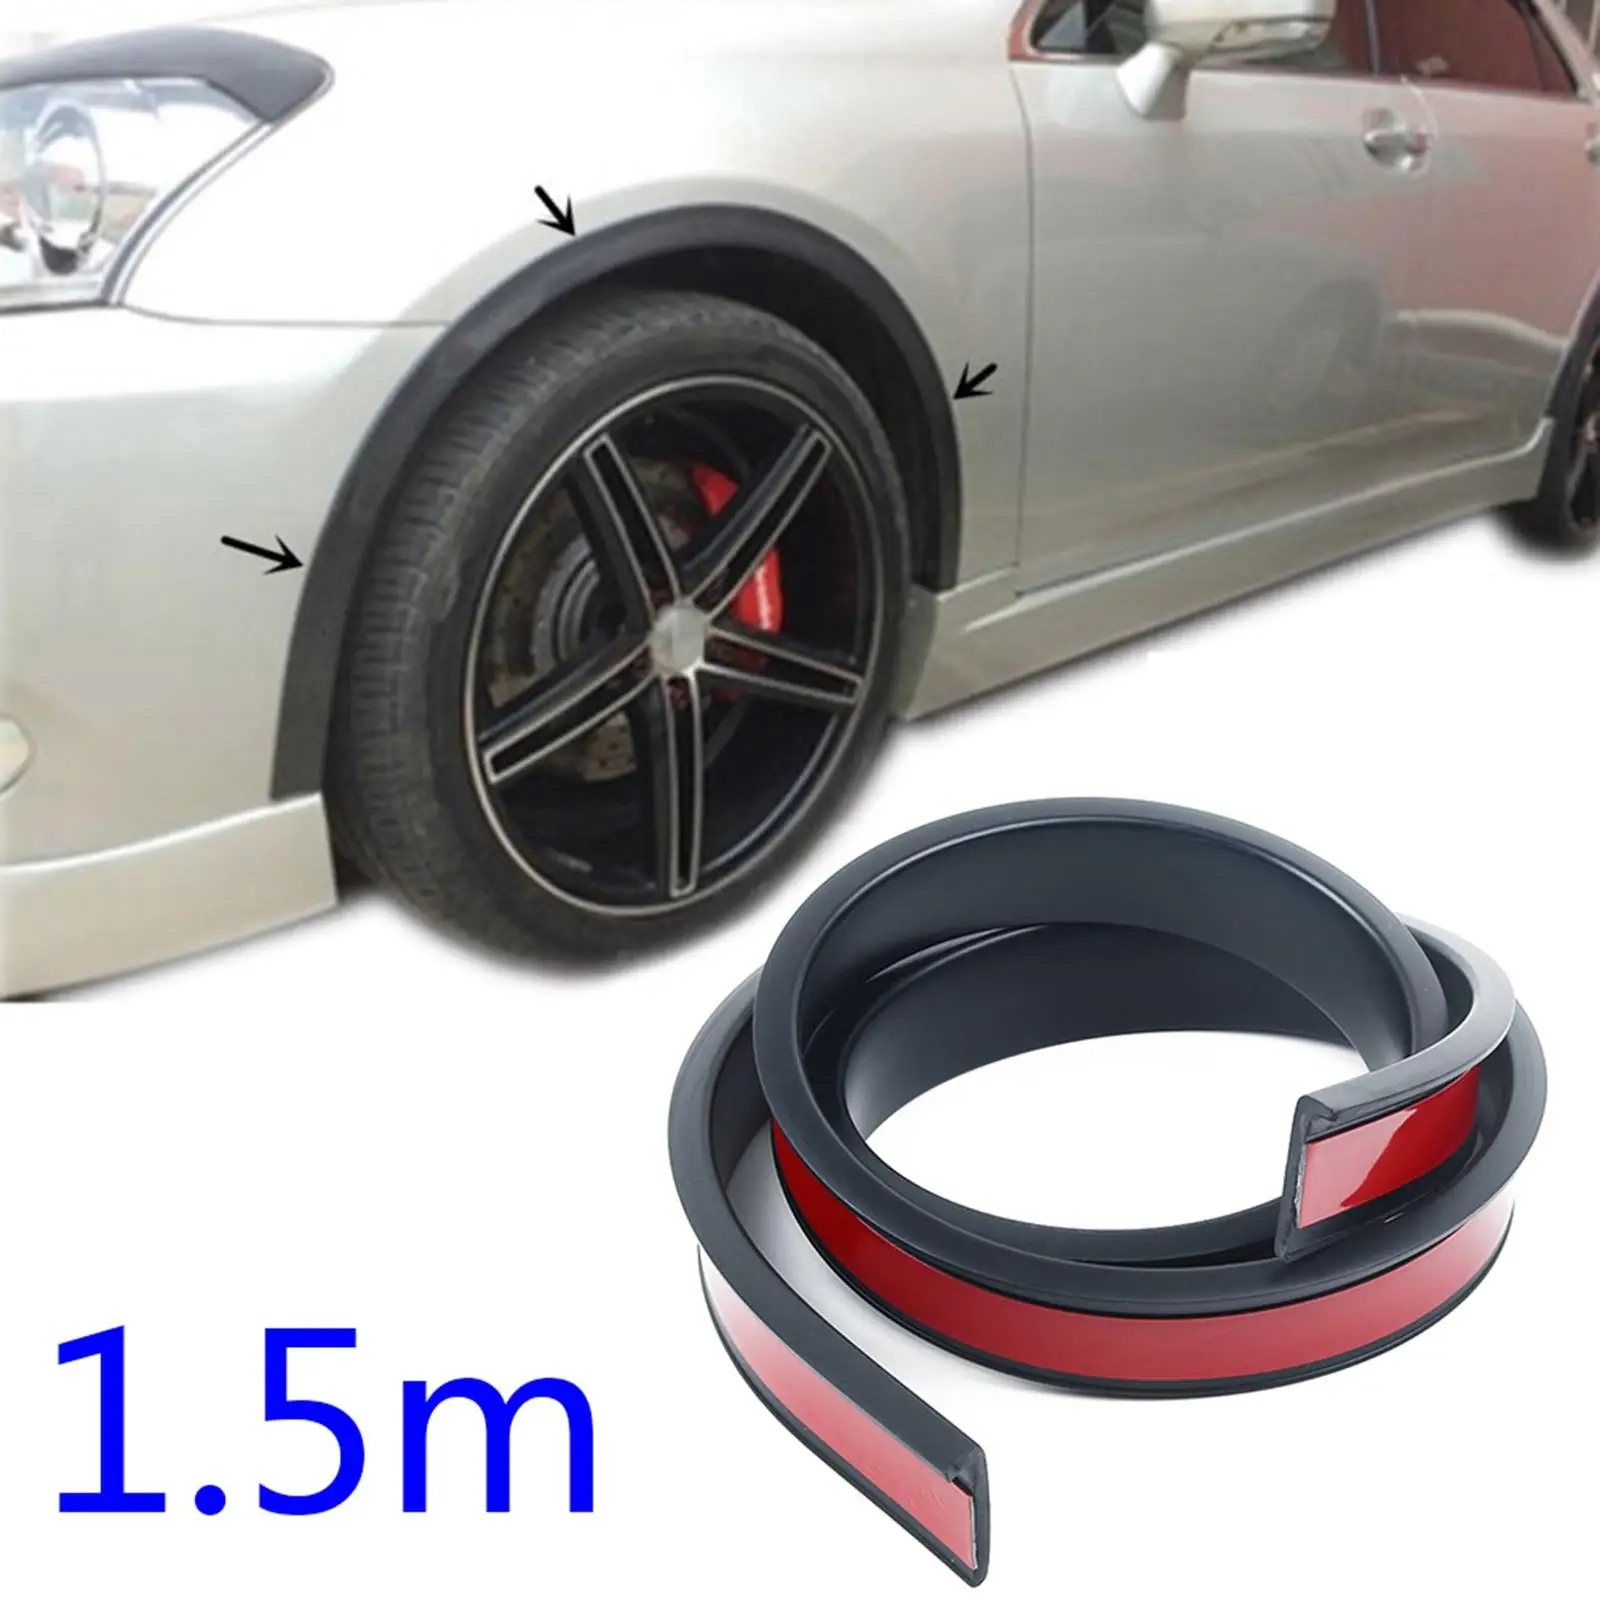 Durable, 4.9ft 1.5M Corner pad Extension Moulding Protector Strip for Wheel Wells Suvs Pickup Truck